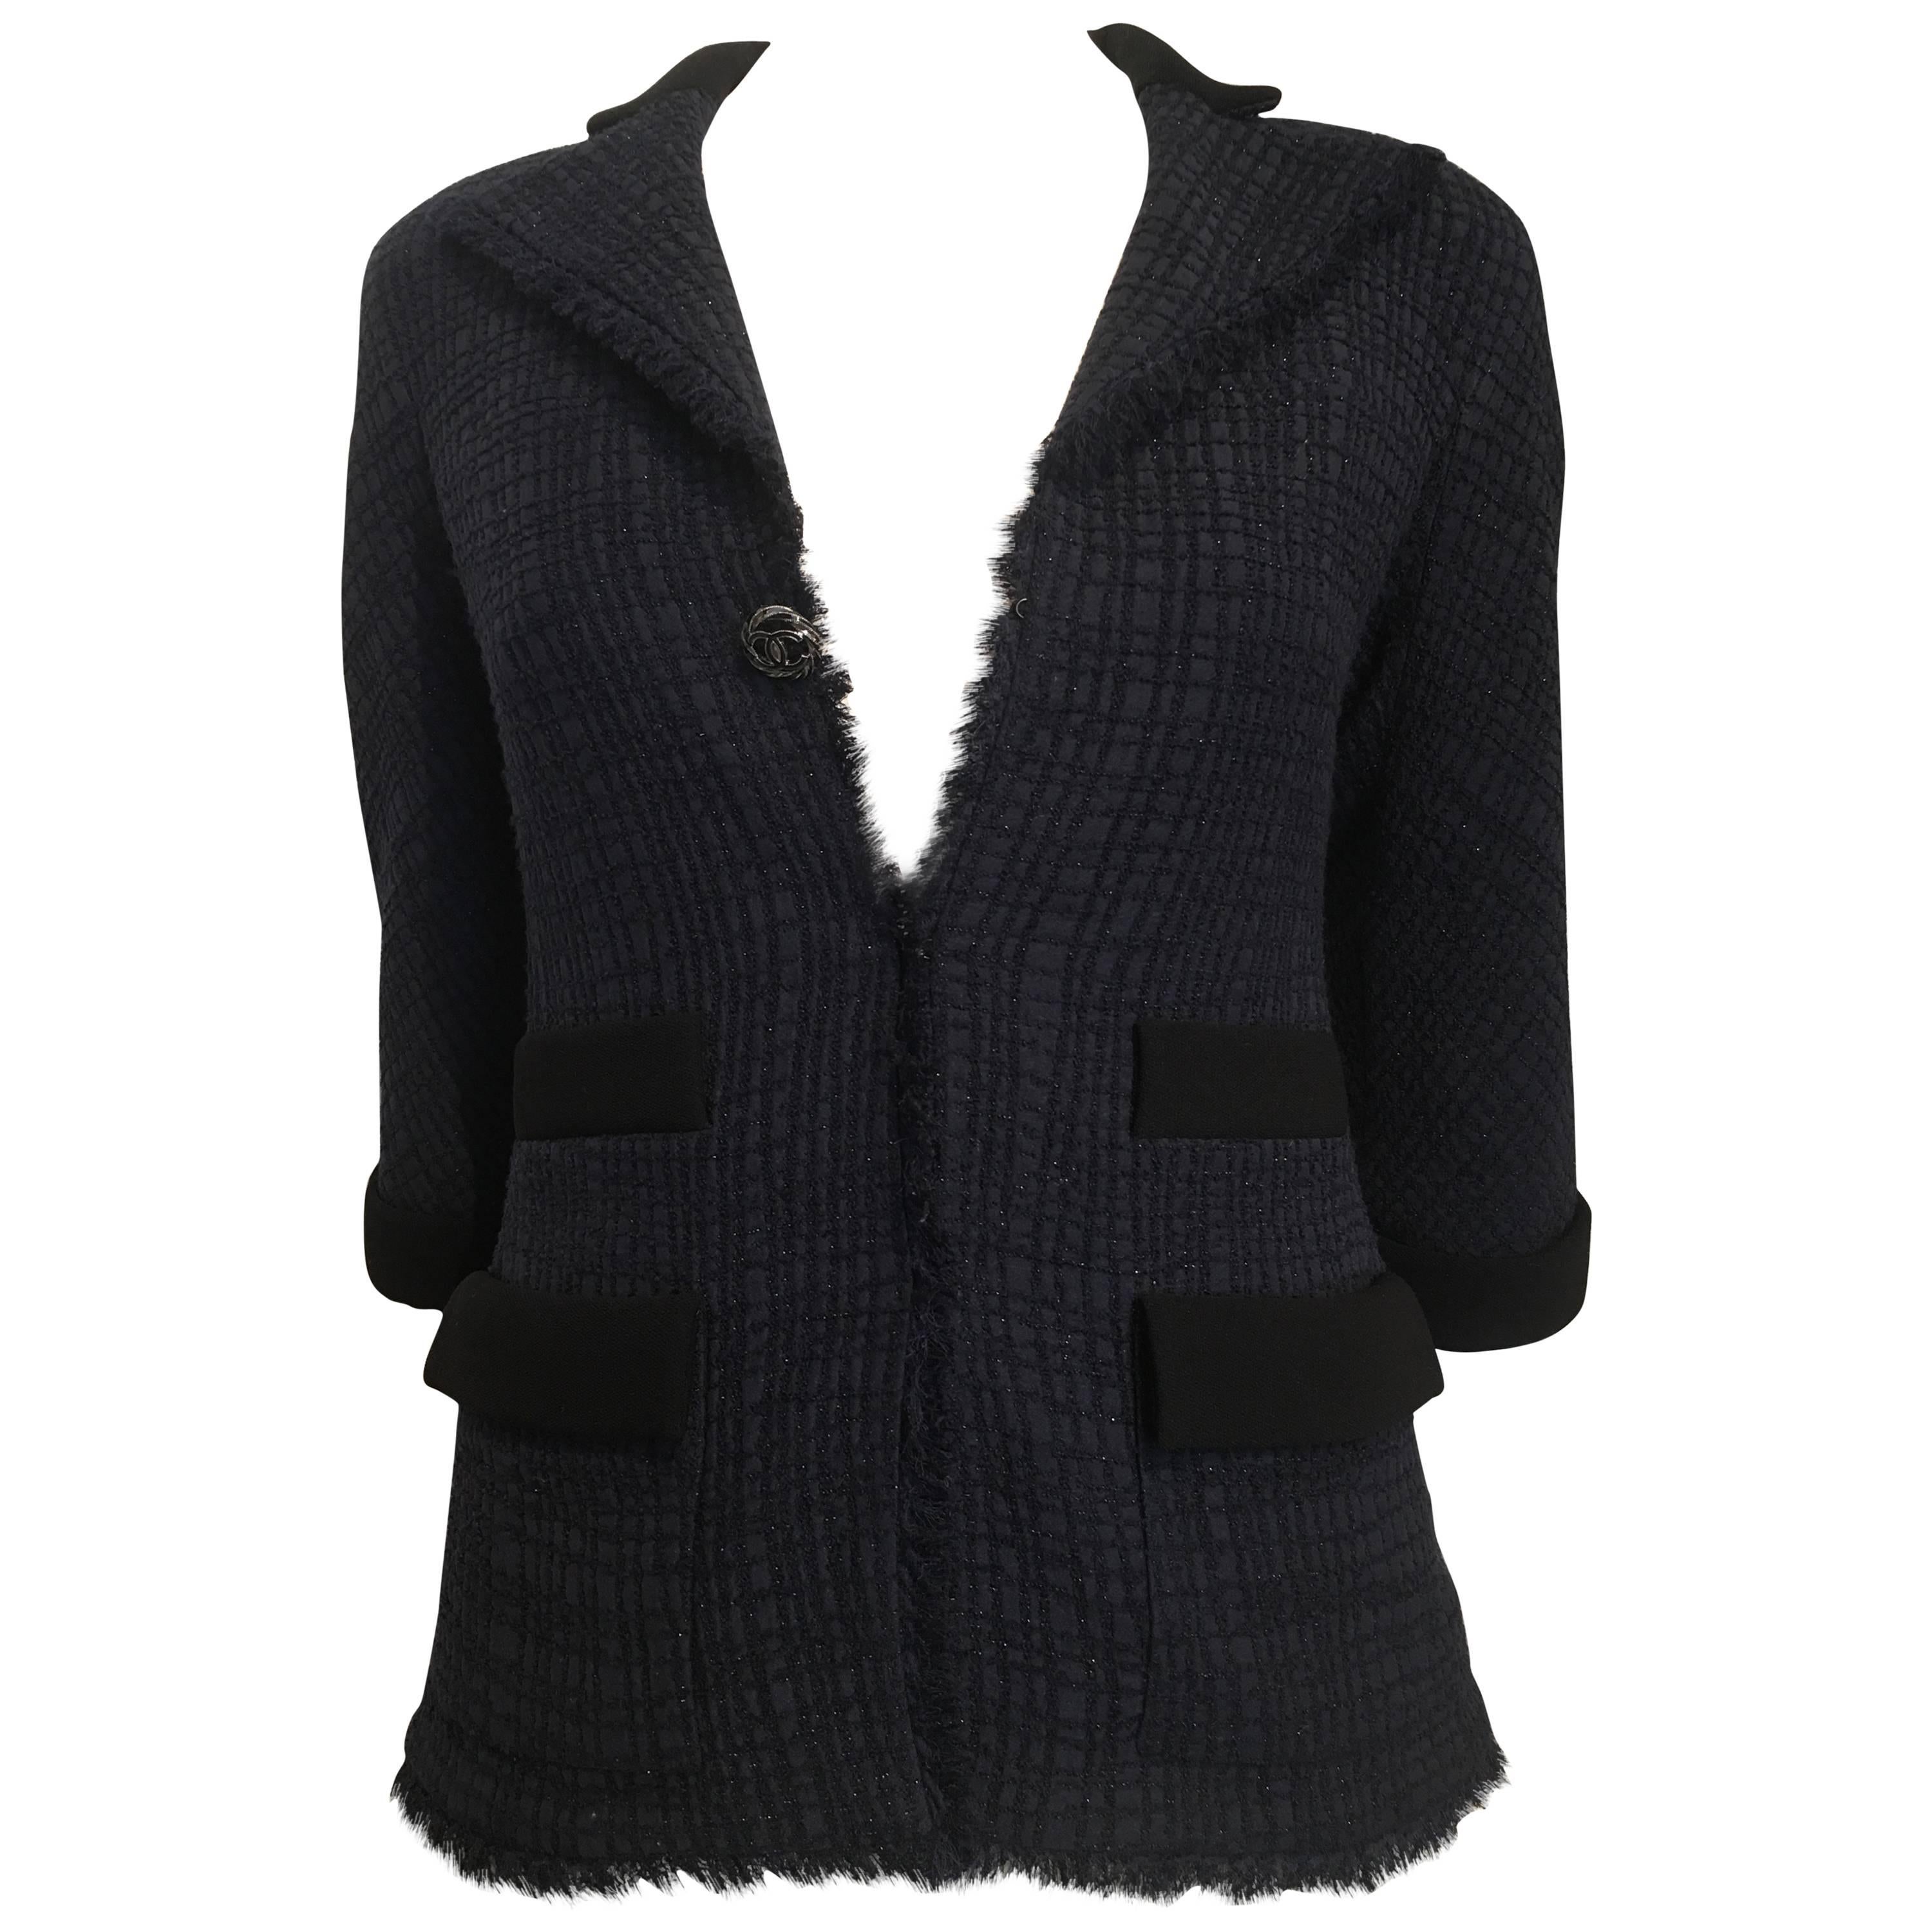 Chanel Navy and Black Sparkly Jacket size 34 (2)